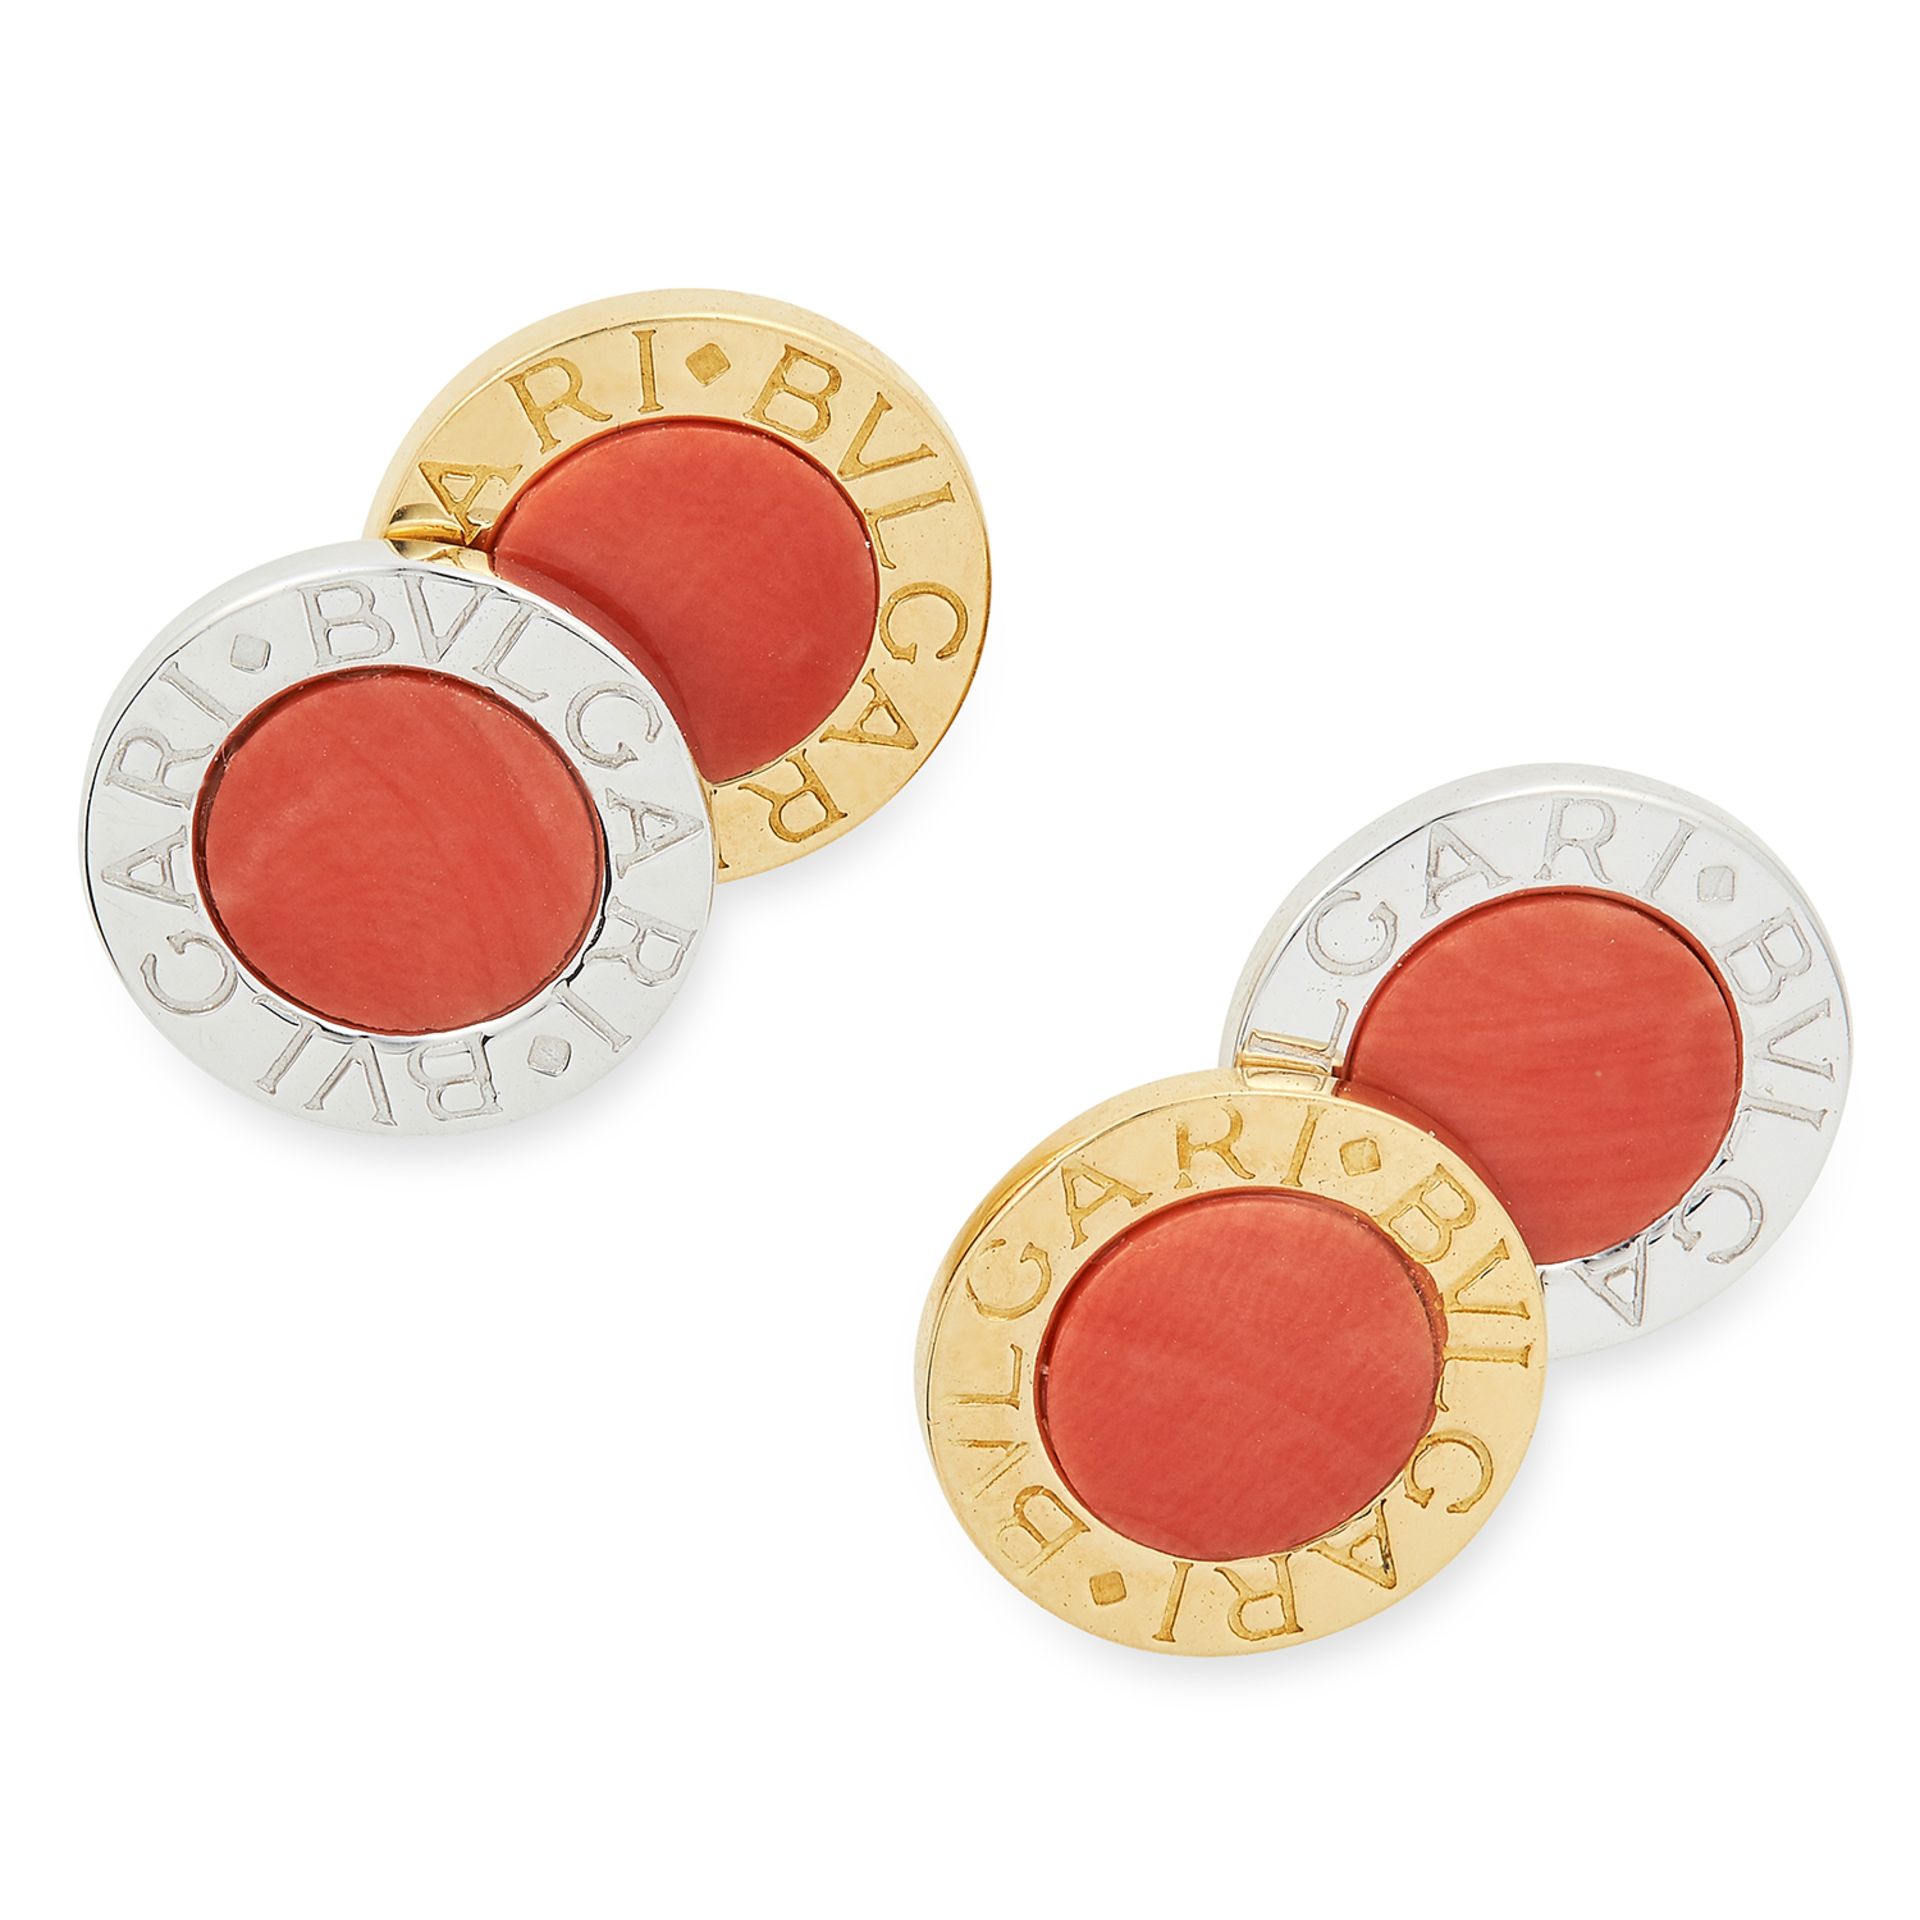 CORAL CUFFLINKS BY BULGARI each circular face set with a polished piece of coral, signed BVLGARI,